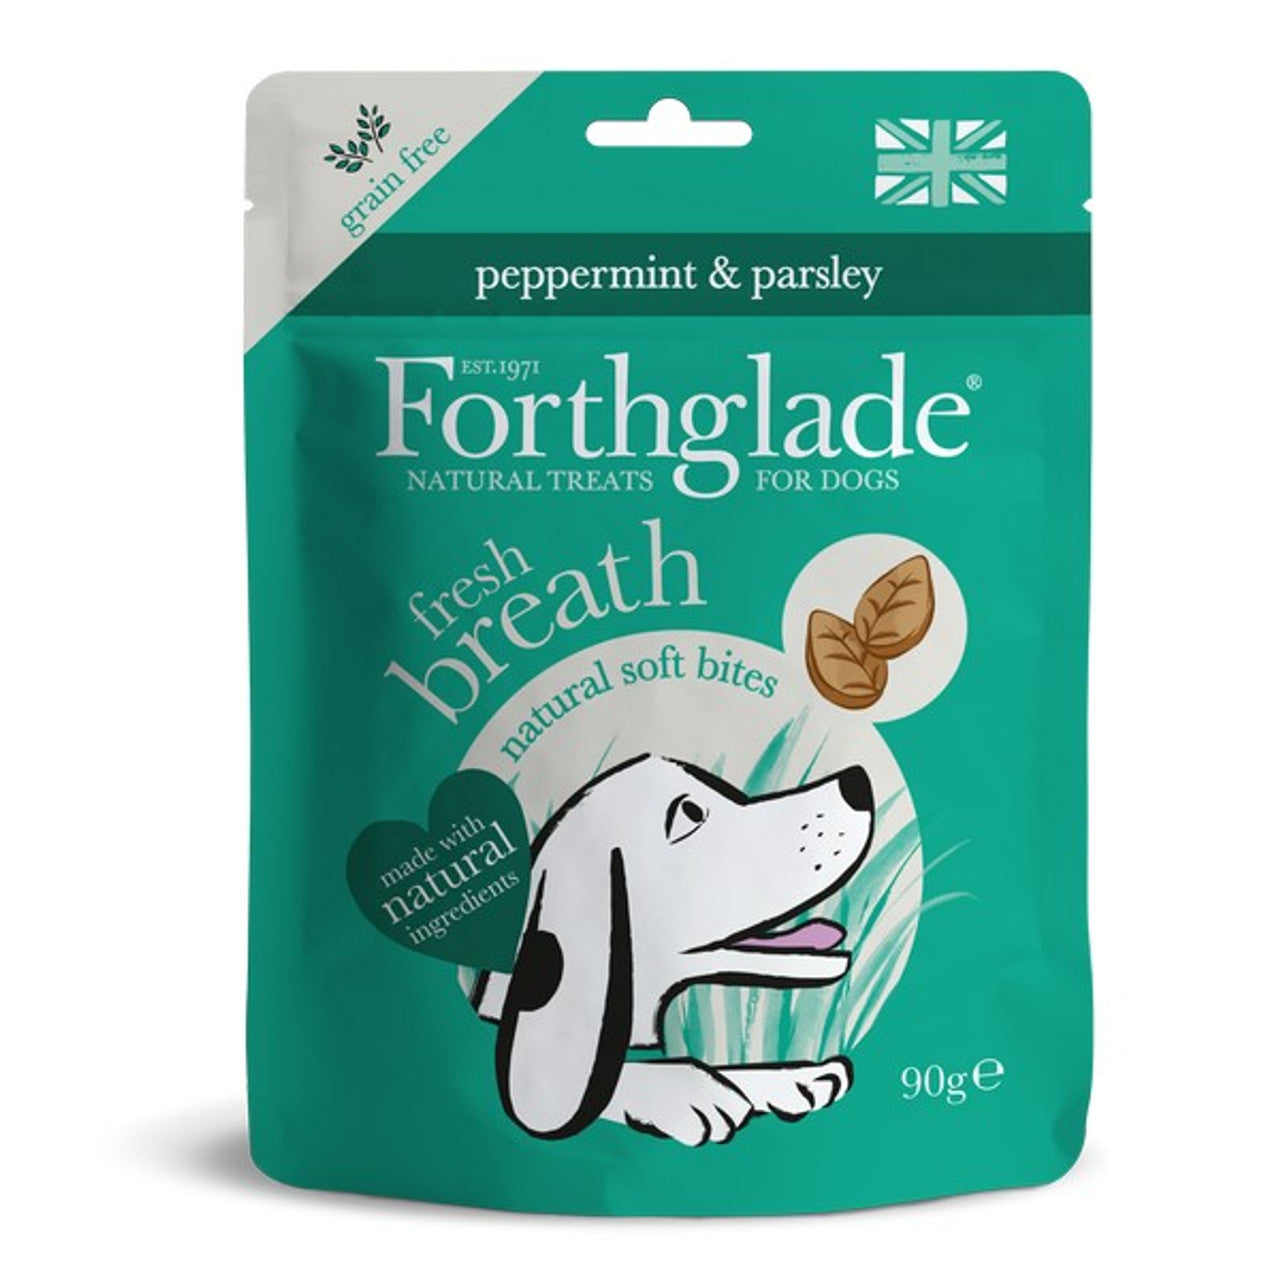 Forthglade fresh breath multi-functional soft bites with peppermint & parsley